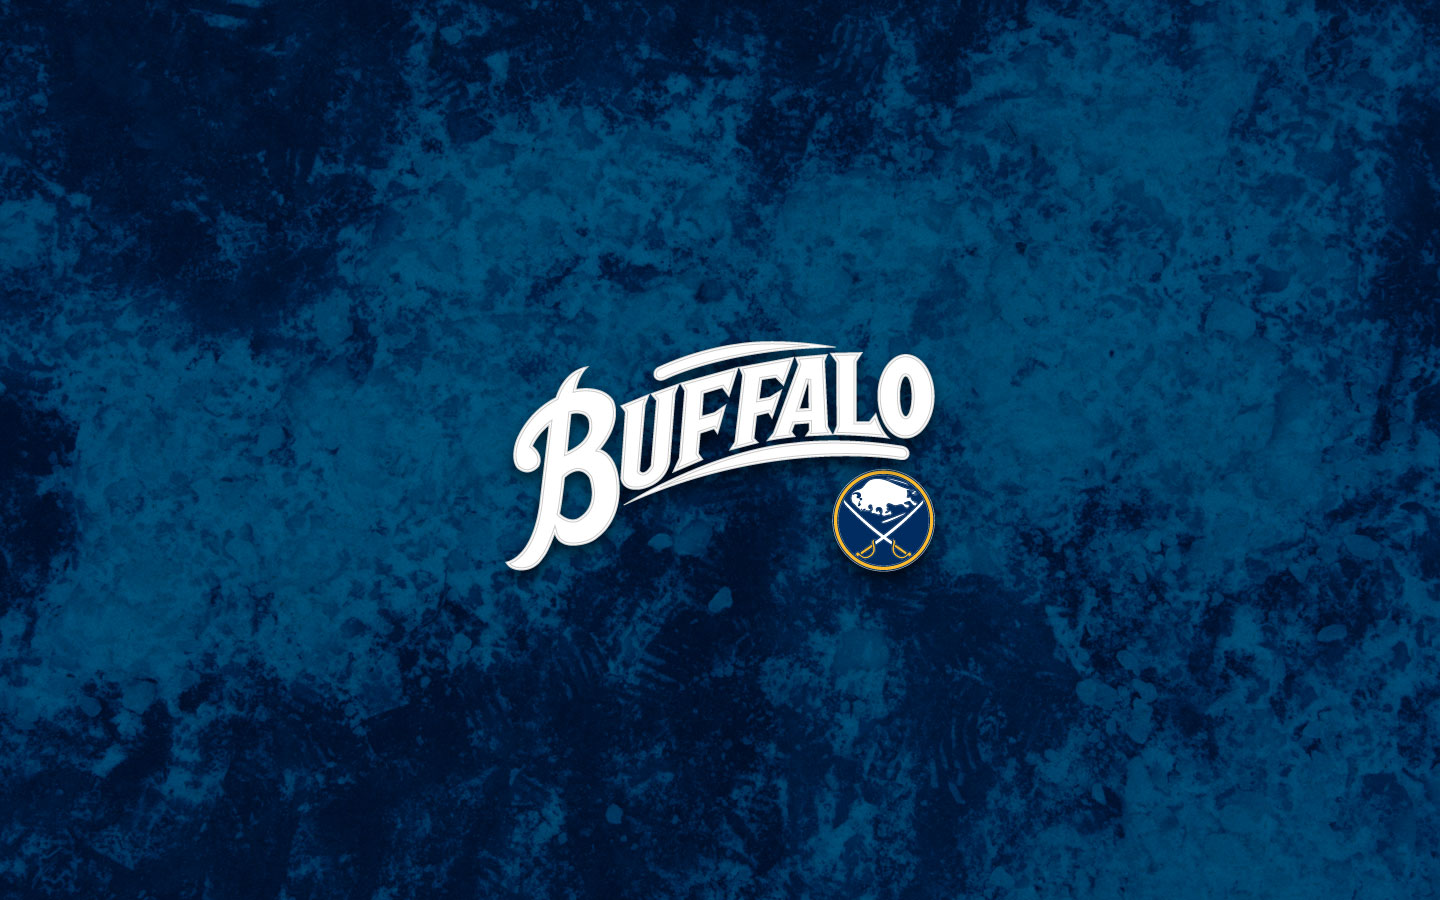 Sabres to air on national TV 15 times